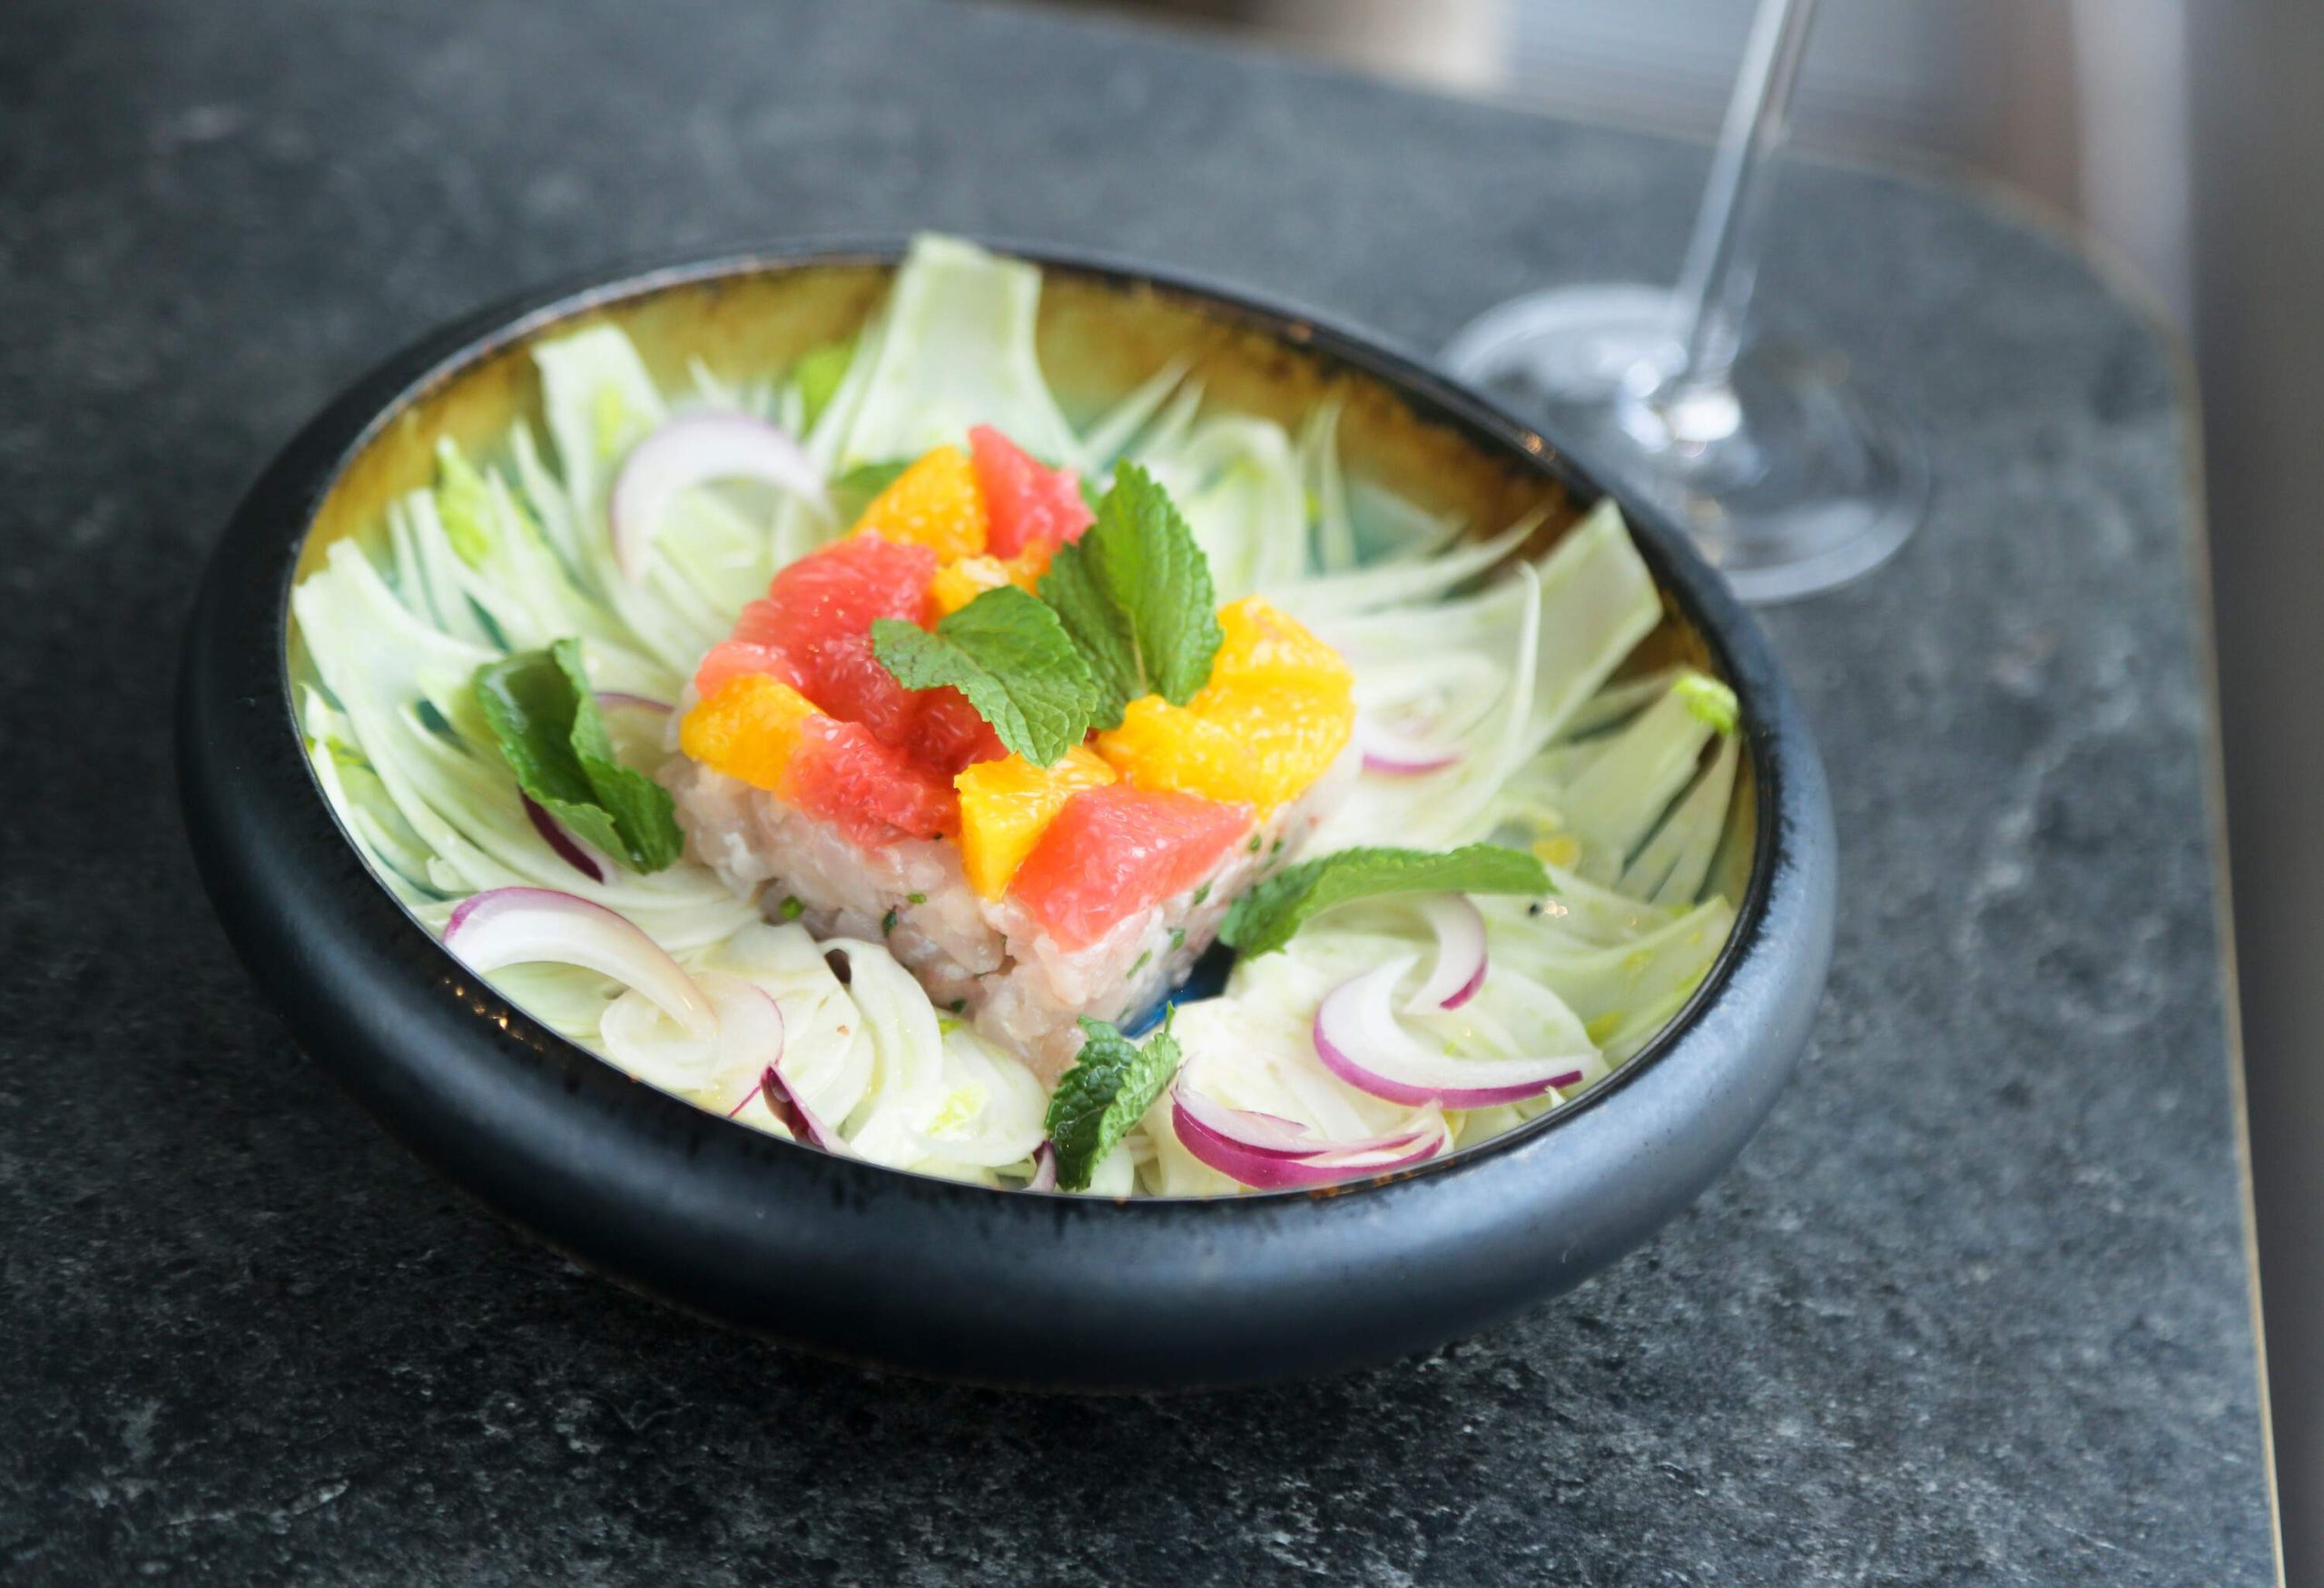 A bowl of raw fish dish garnished with onion, mint leaves, and orange slices.